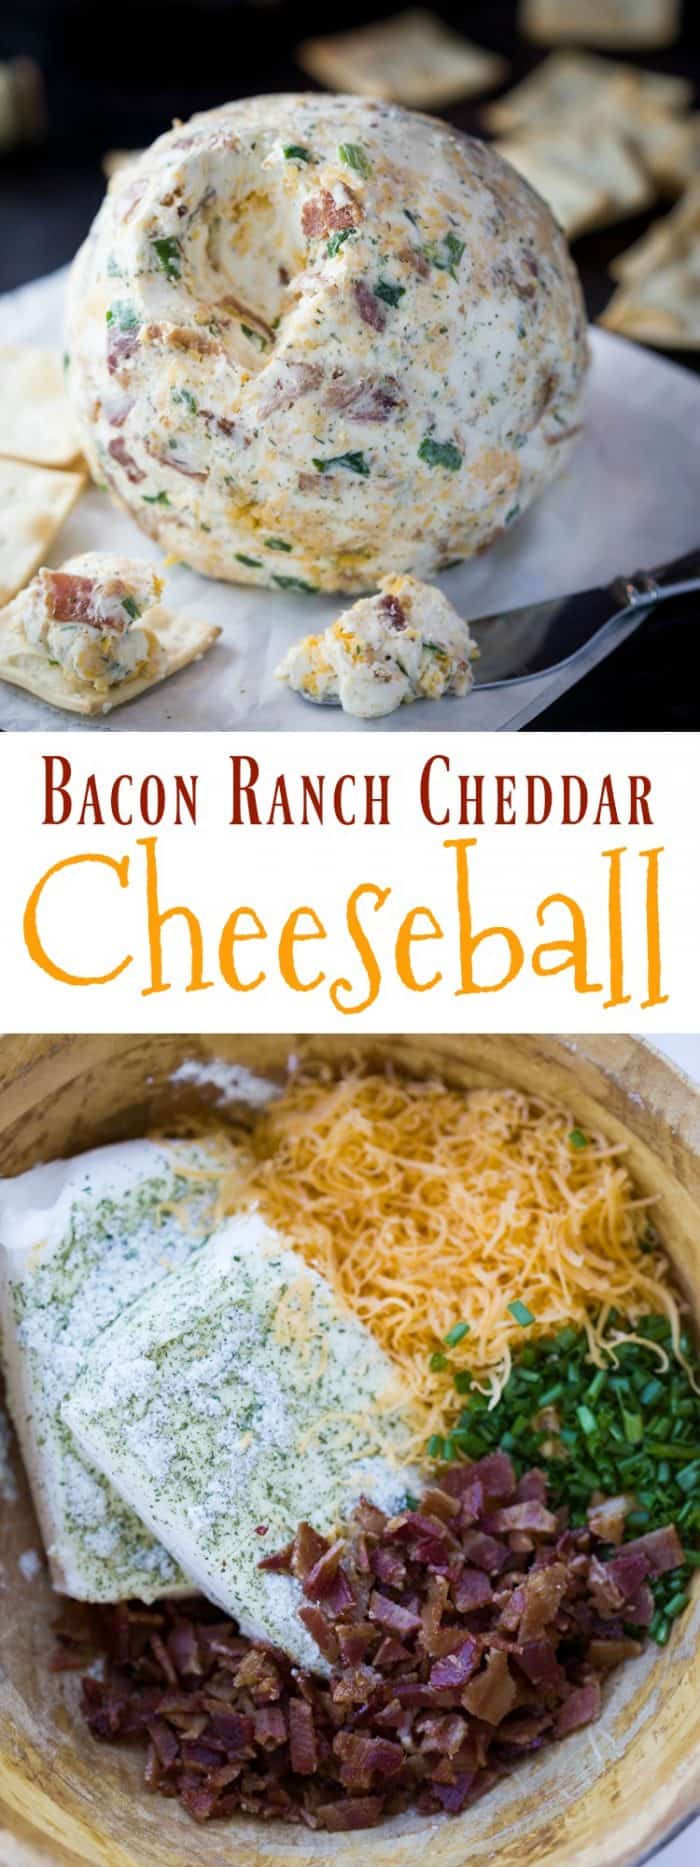 This cheese-ball as a perfect blend of flavors including ranch, crispy bacon bits, 2 kinds of cheese, and chives. A perfectly easy and delicious appetizer! | The Cozy Cook | #cheese #fingerfood #appetizer #bacon #cheddar #cheeseball